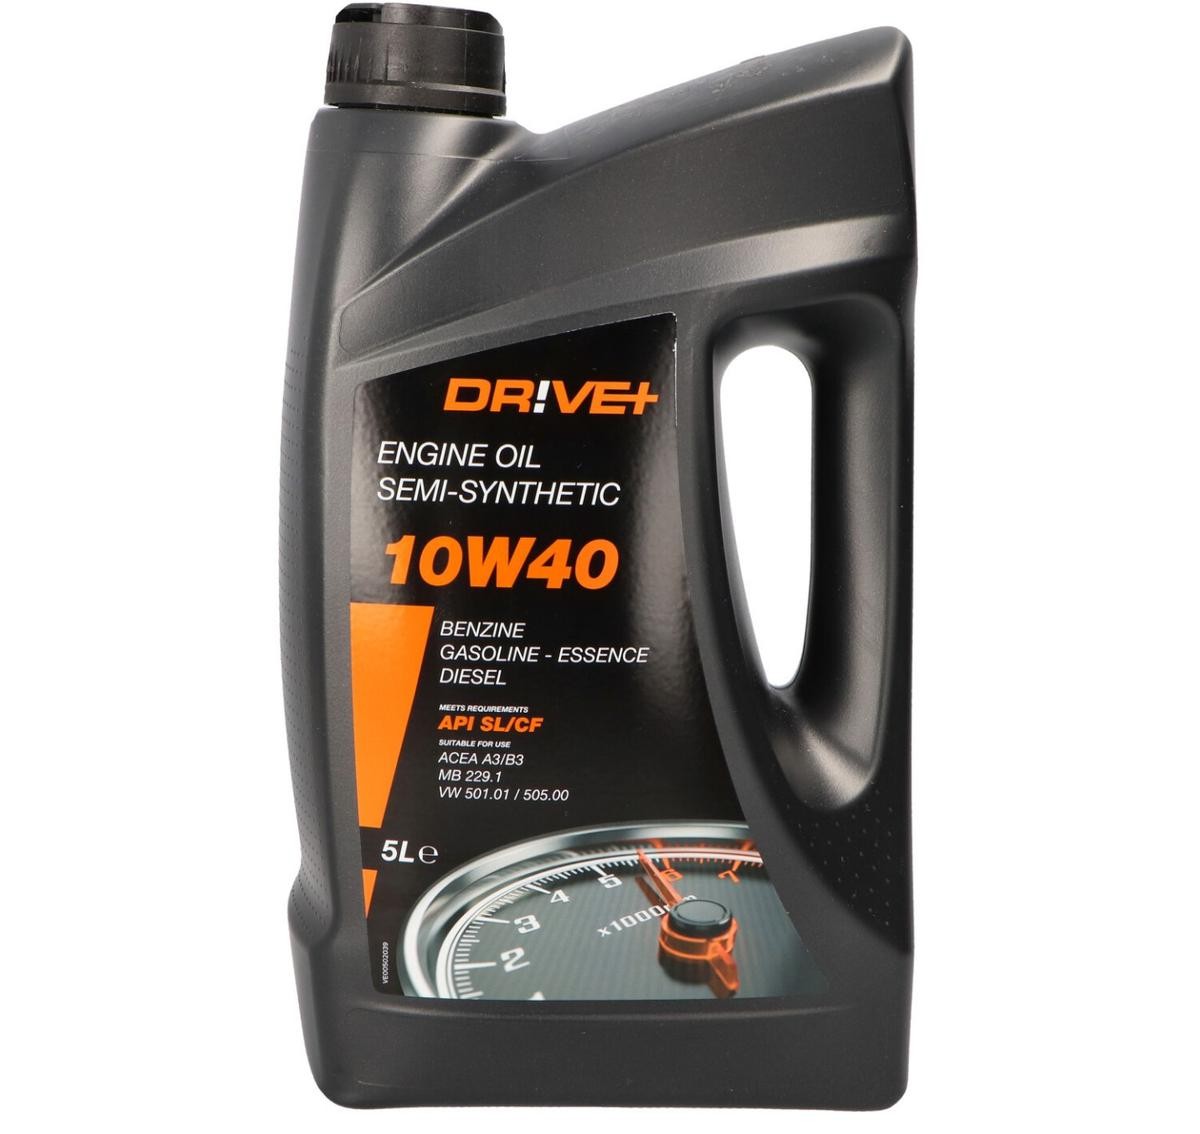 Dr!ve+ DP3310.10.040 Engine oil FORD experience and price